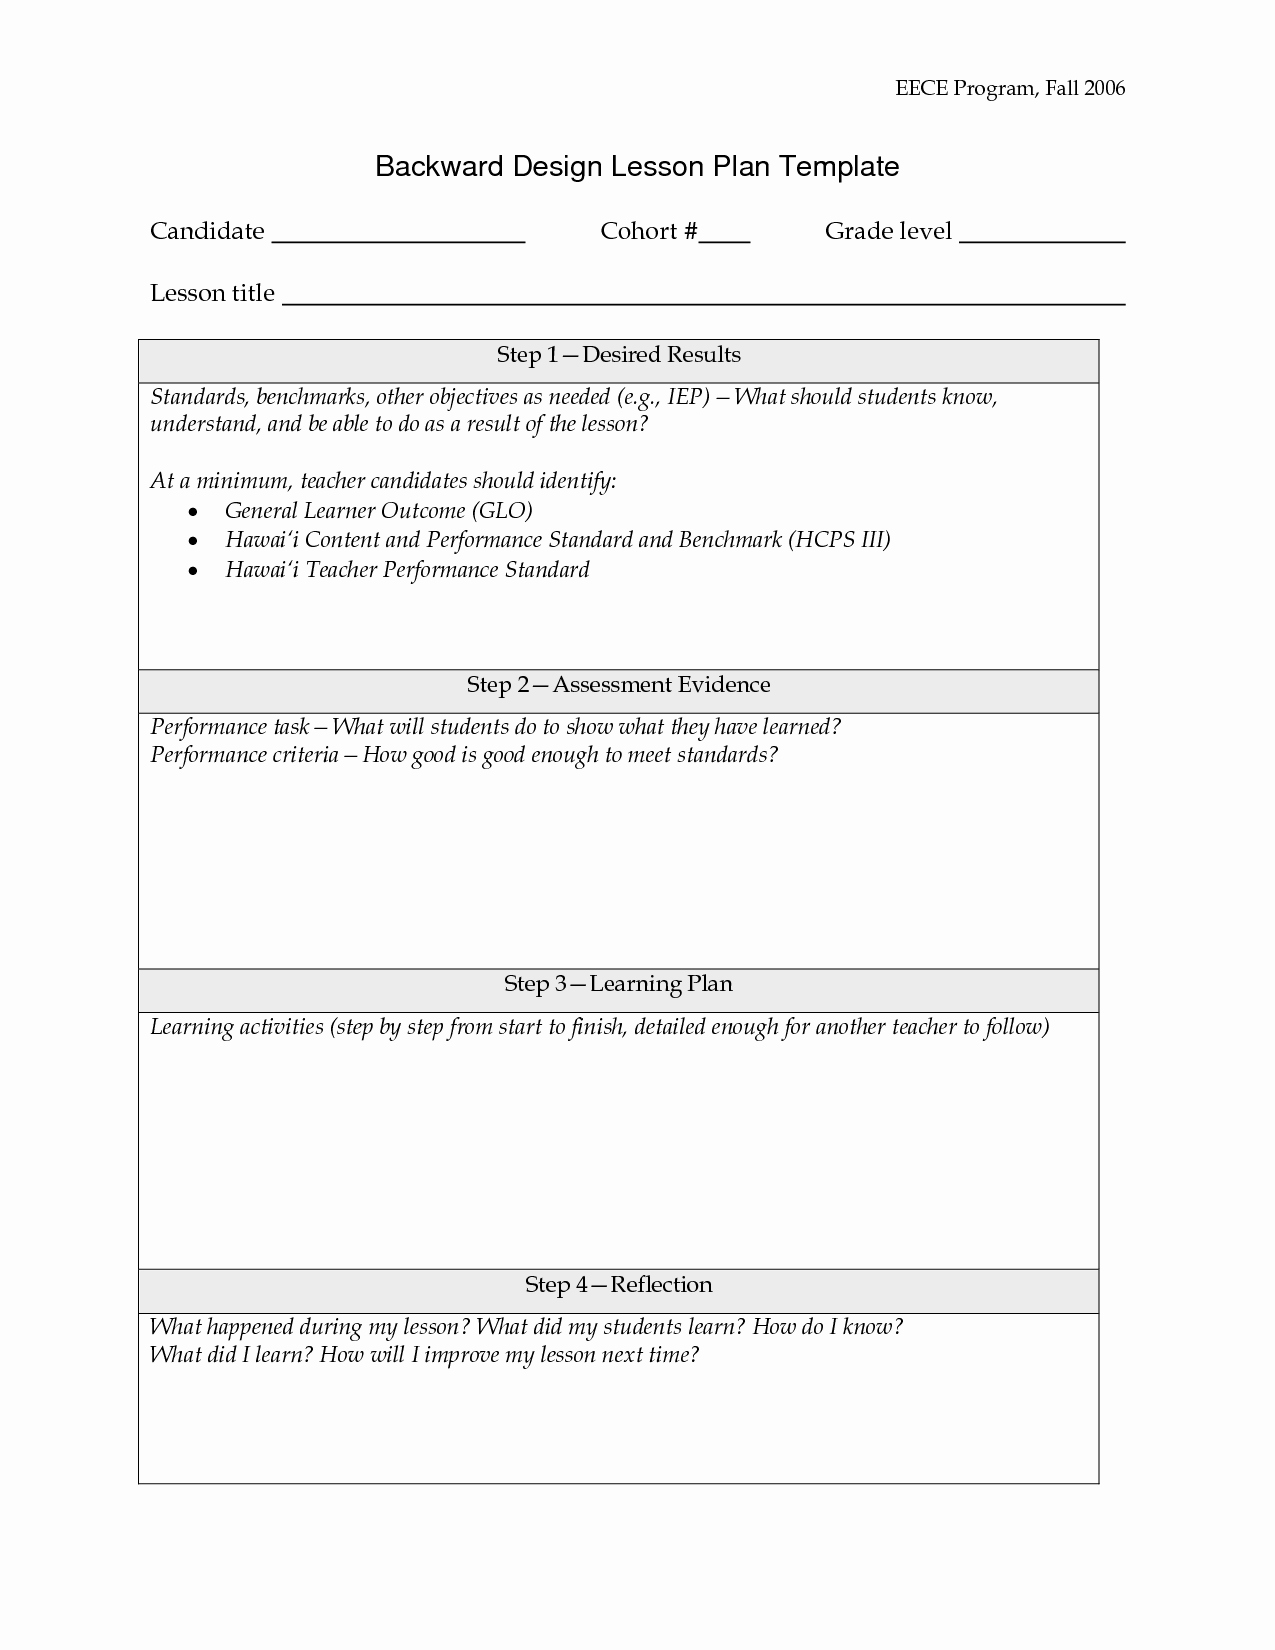 Blank Ubd Lesson Plan Template Unique Backward Planning Template